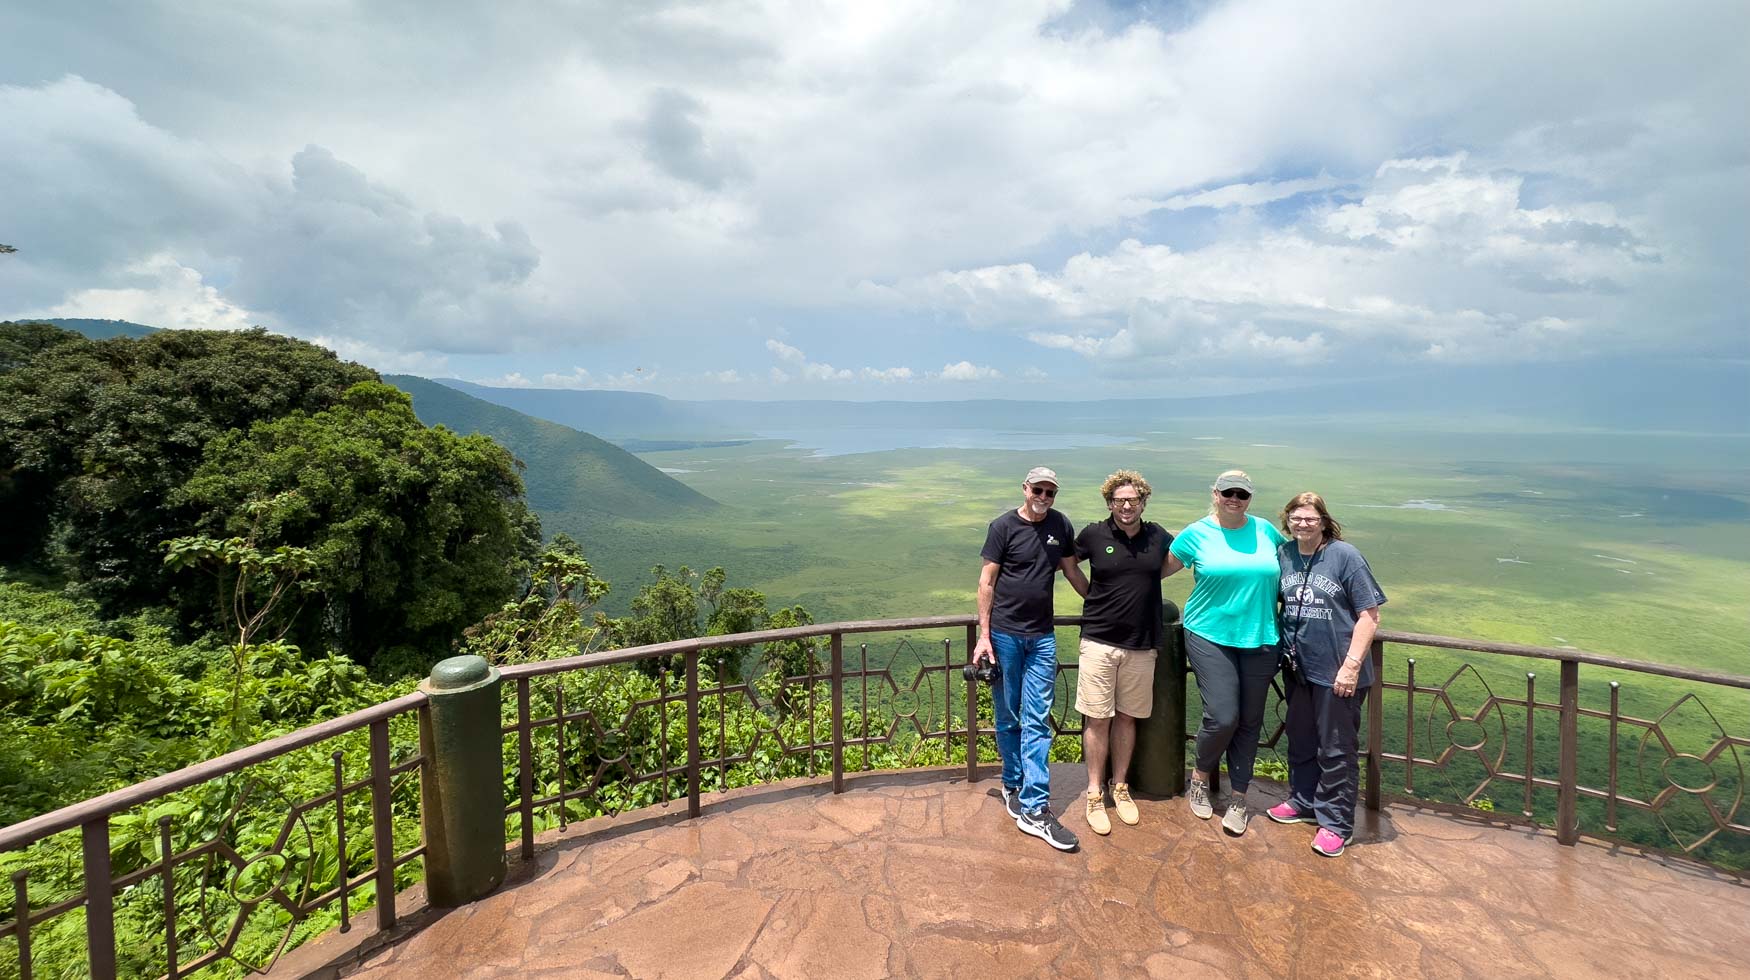 Michael Laubscher and his guests posing on a lookout point at the Ngorongoro Crater in Tanzania.